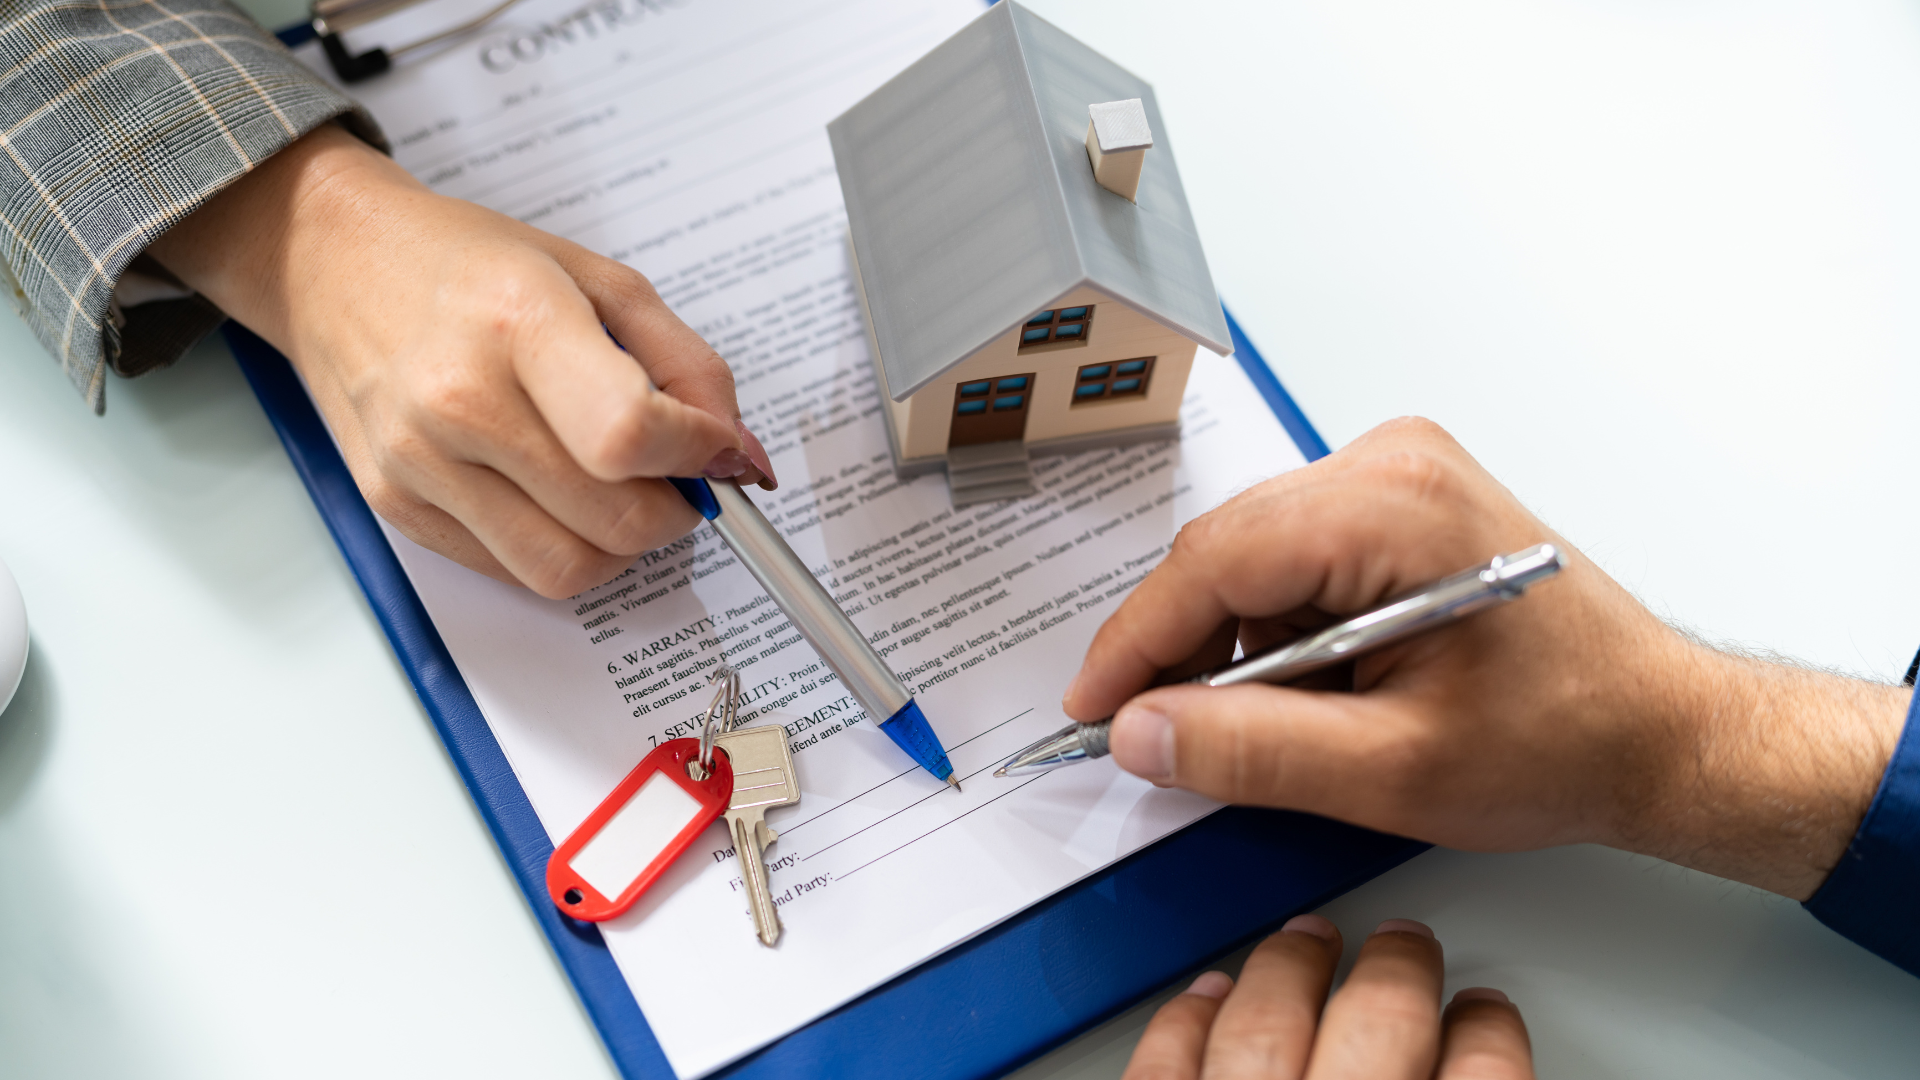 An image of a small business owner selling a property and completing the paperwork